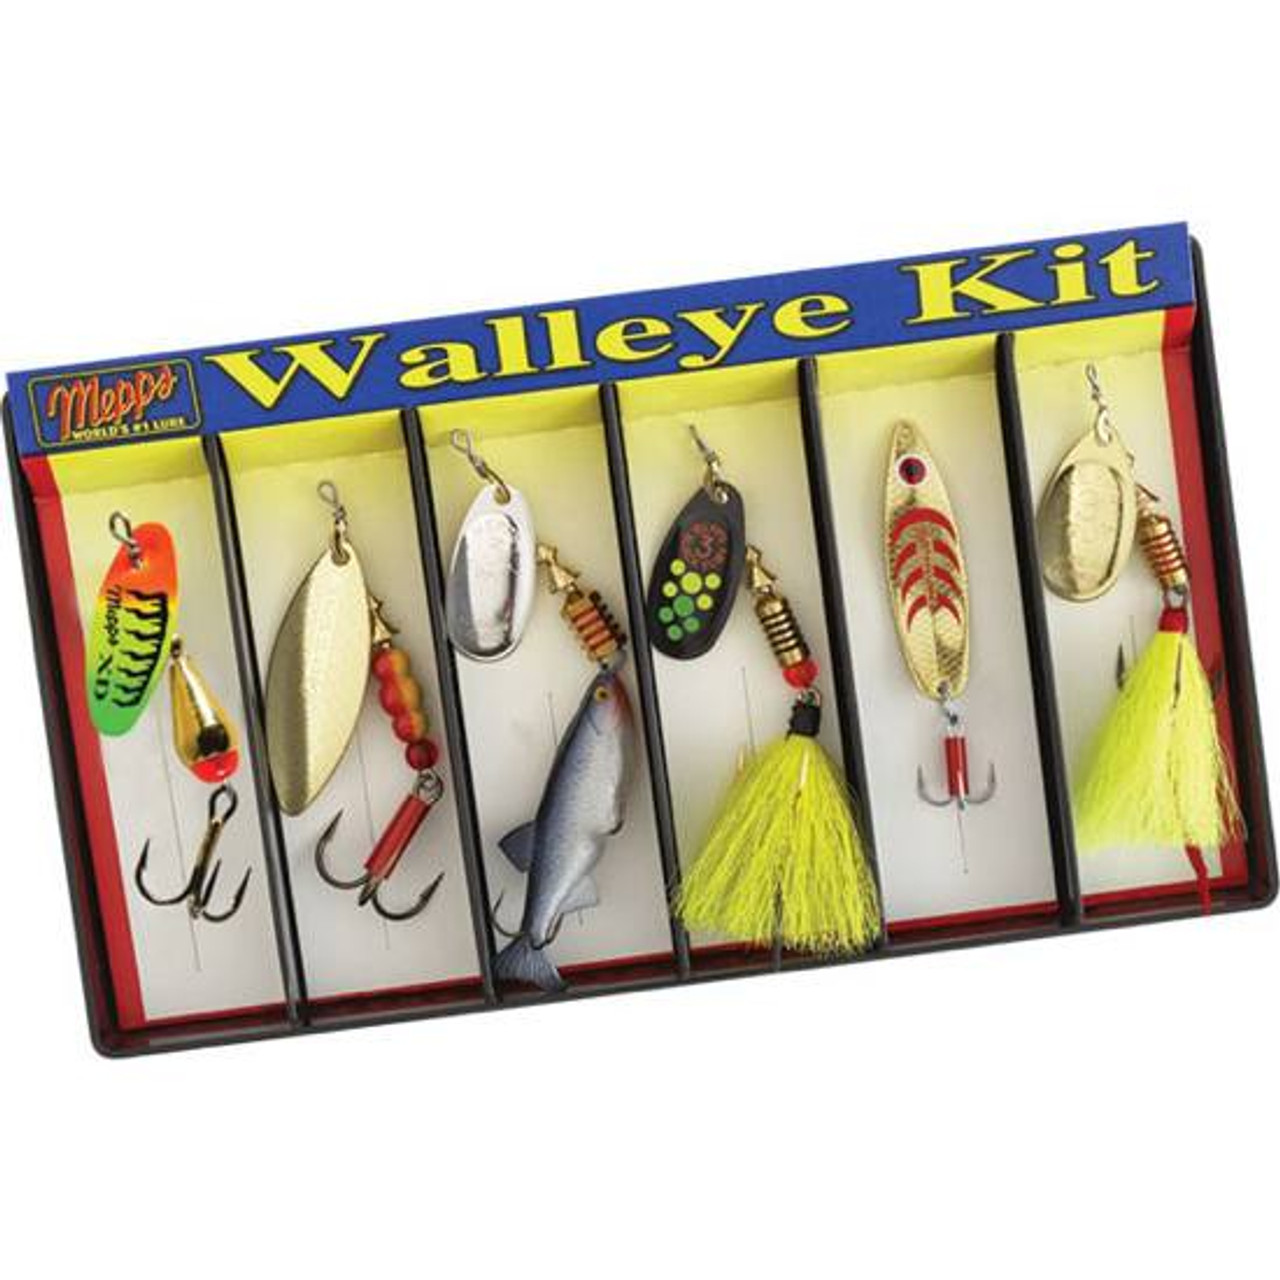 Mepps Walleye Kit - Plain and Dressed Lure Assortment [FC